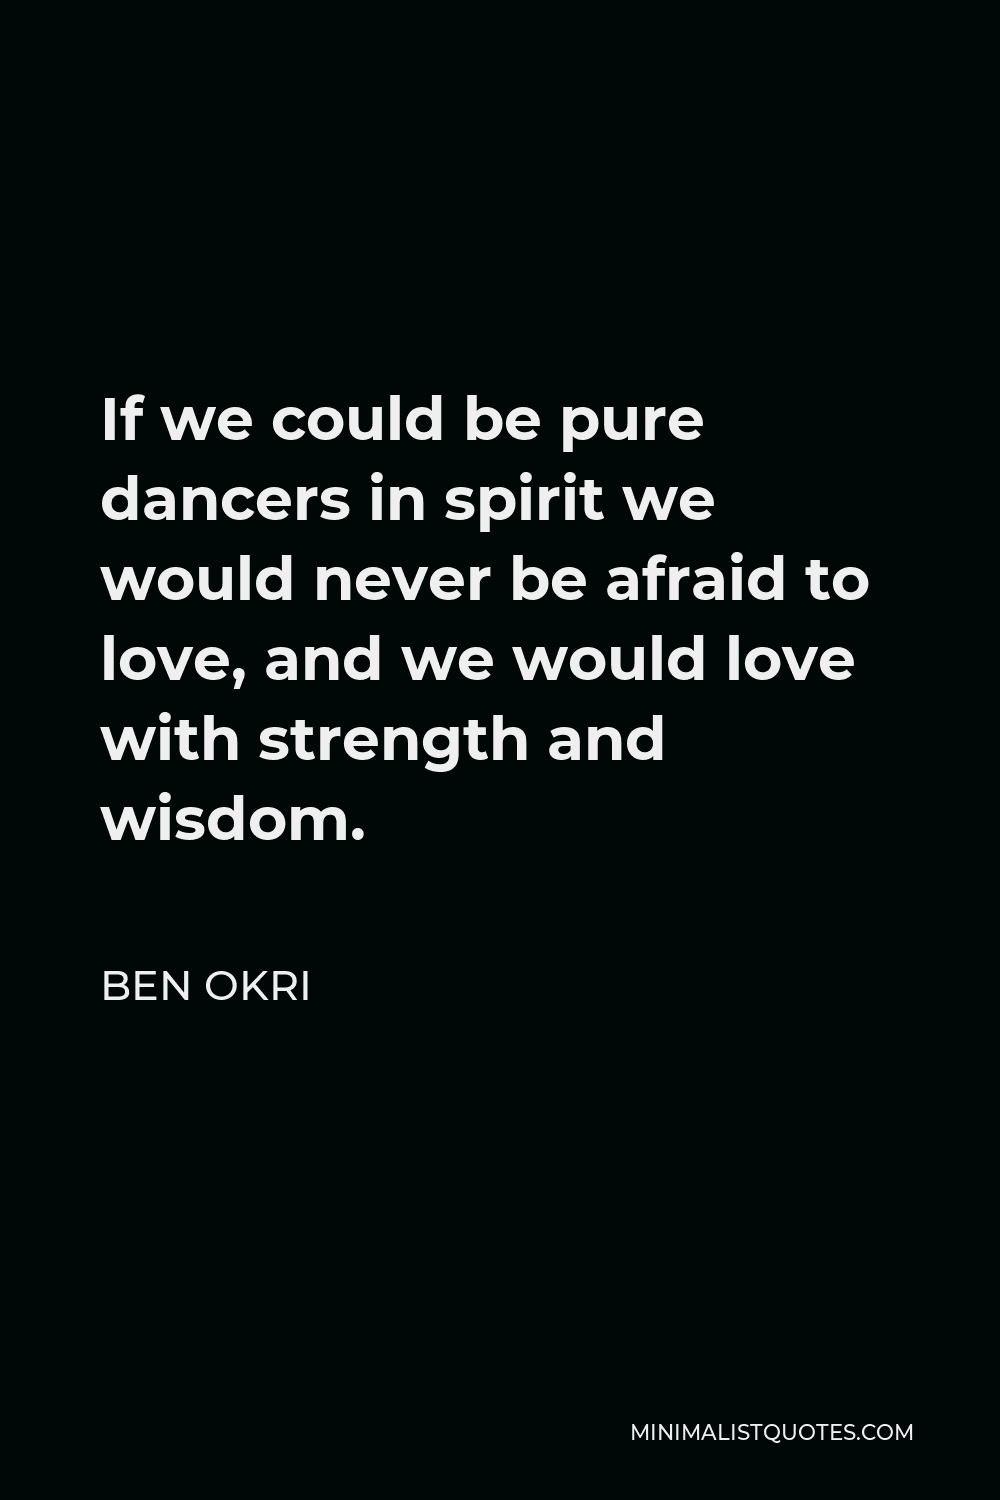 Ben Okri Quote - If we could be pure dancers in spirit we would never be afraid to love, and we would love with strength and wisdom.